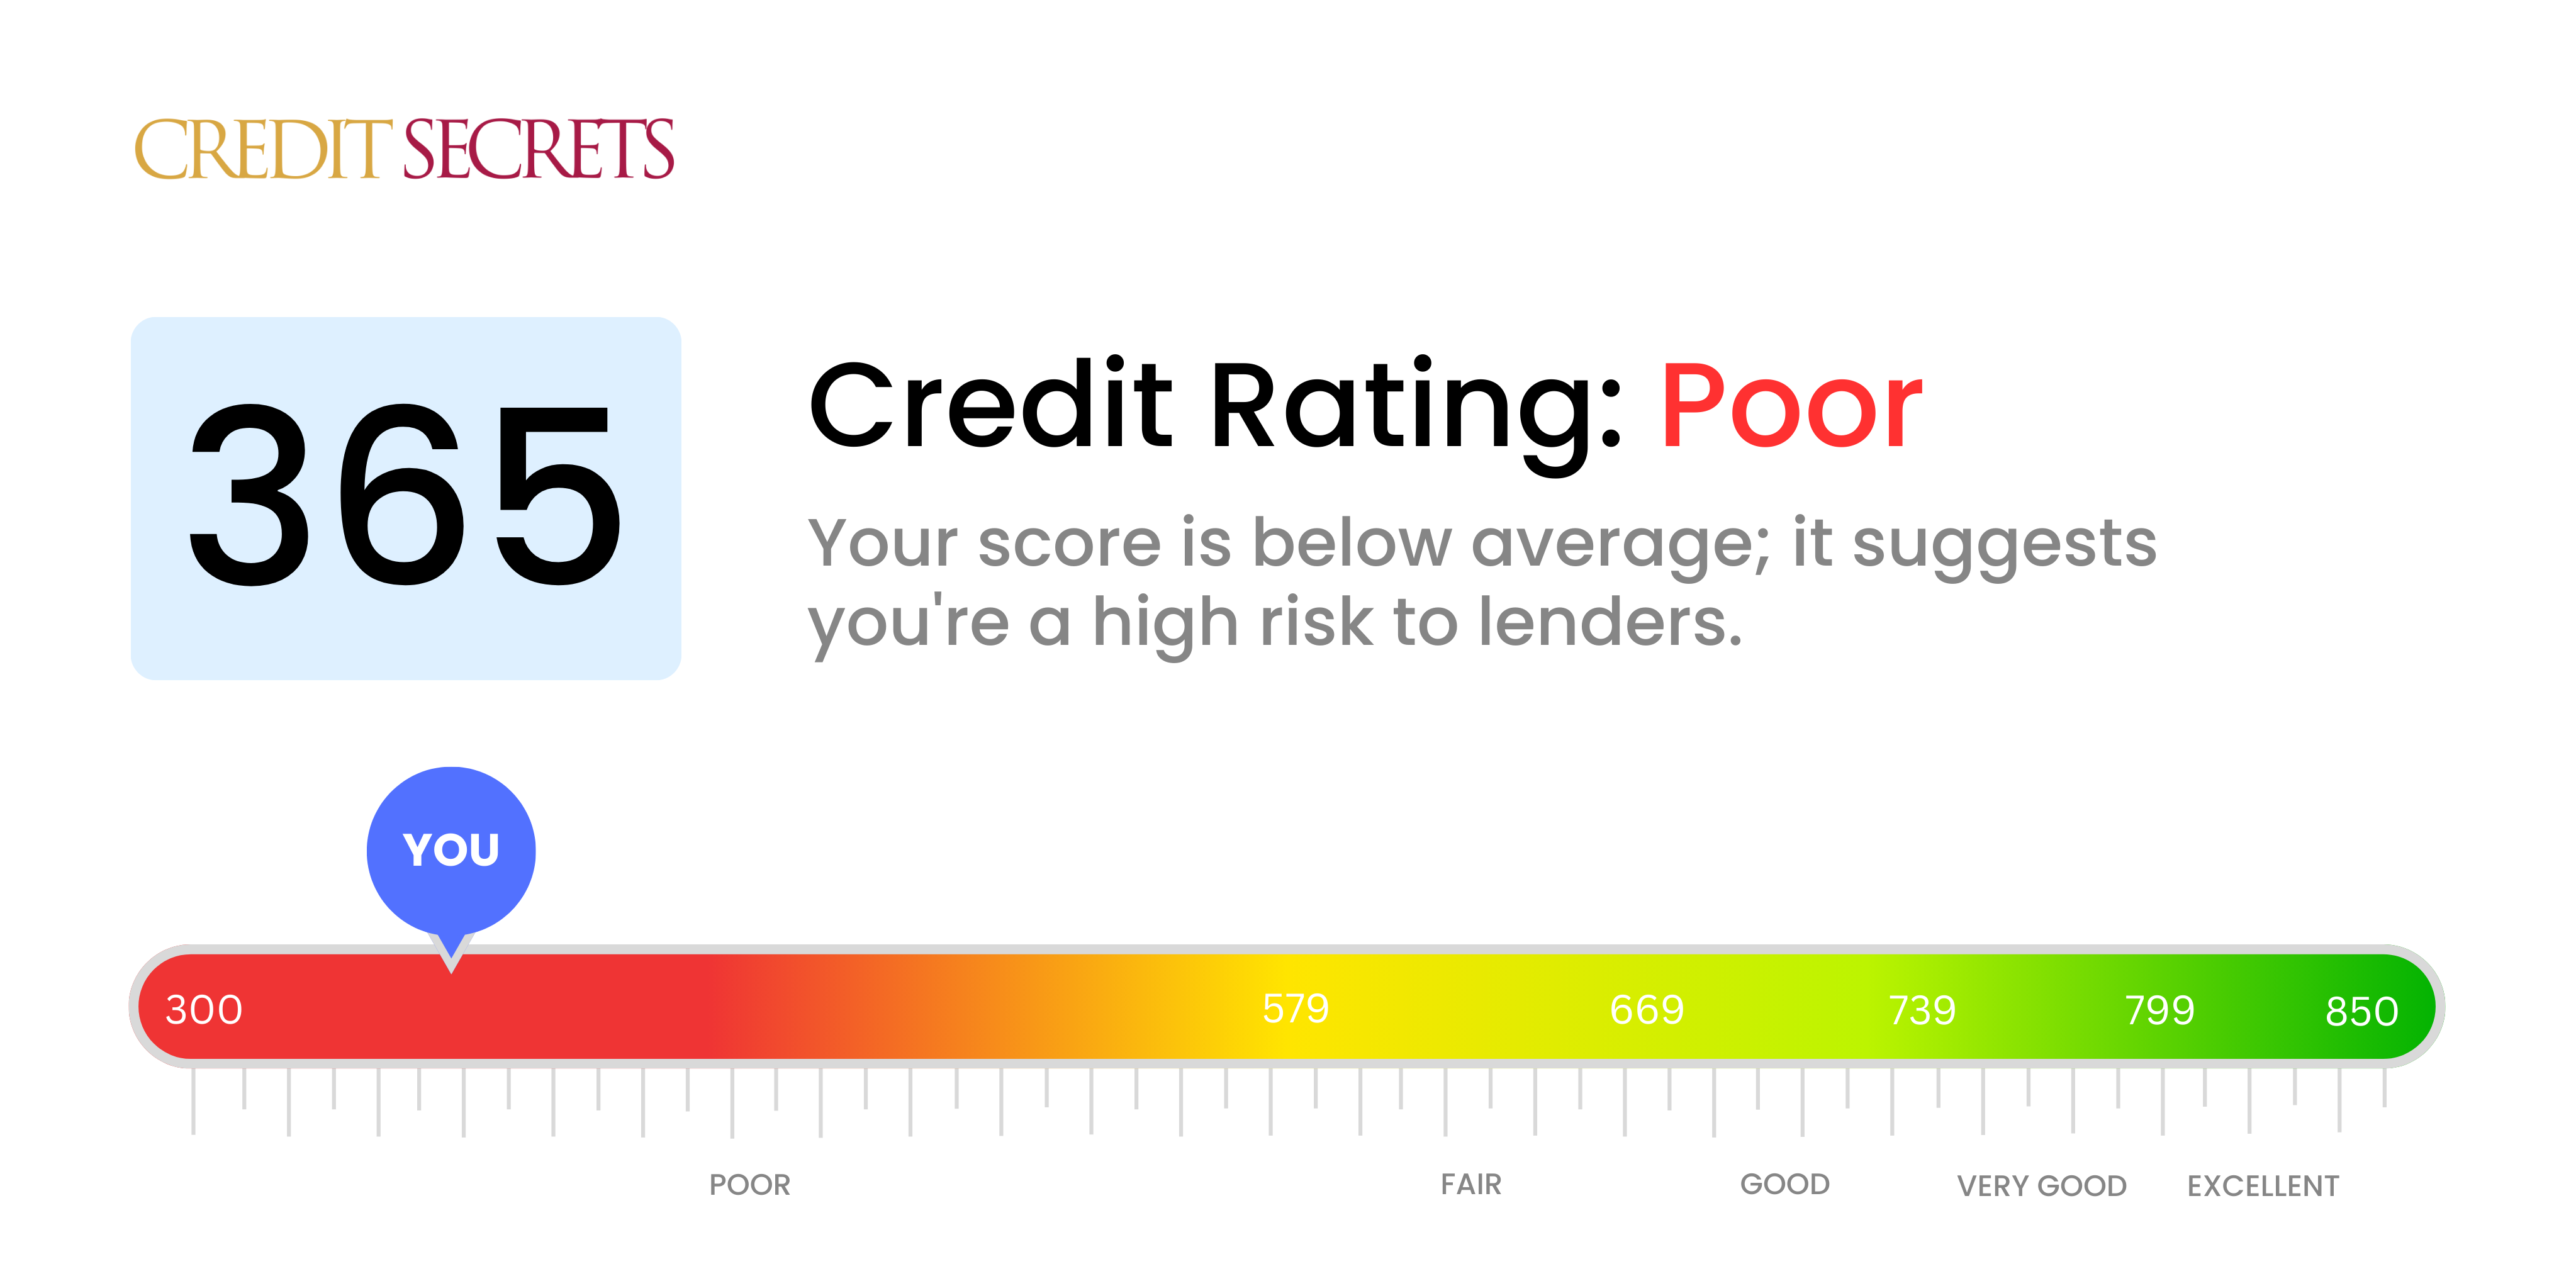 Is 365 a good credit score?